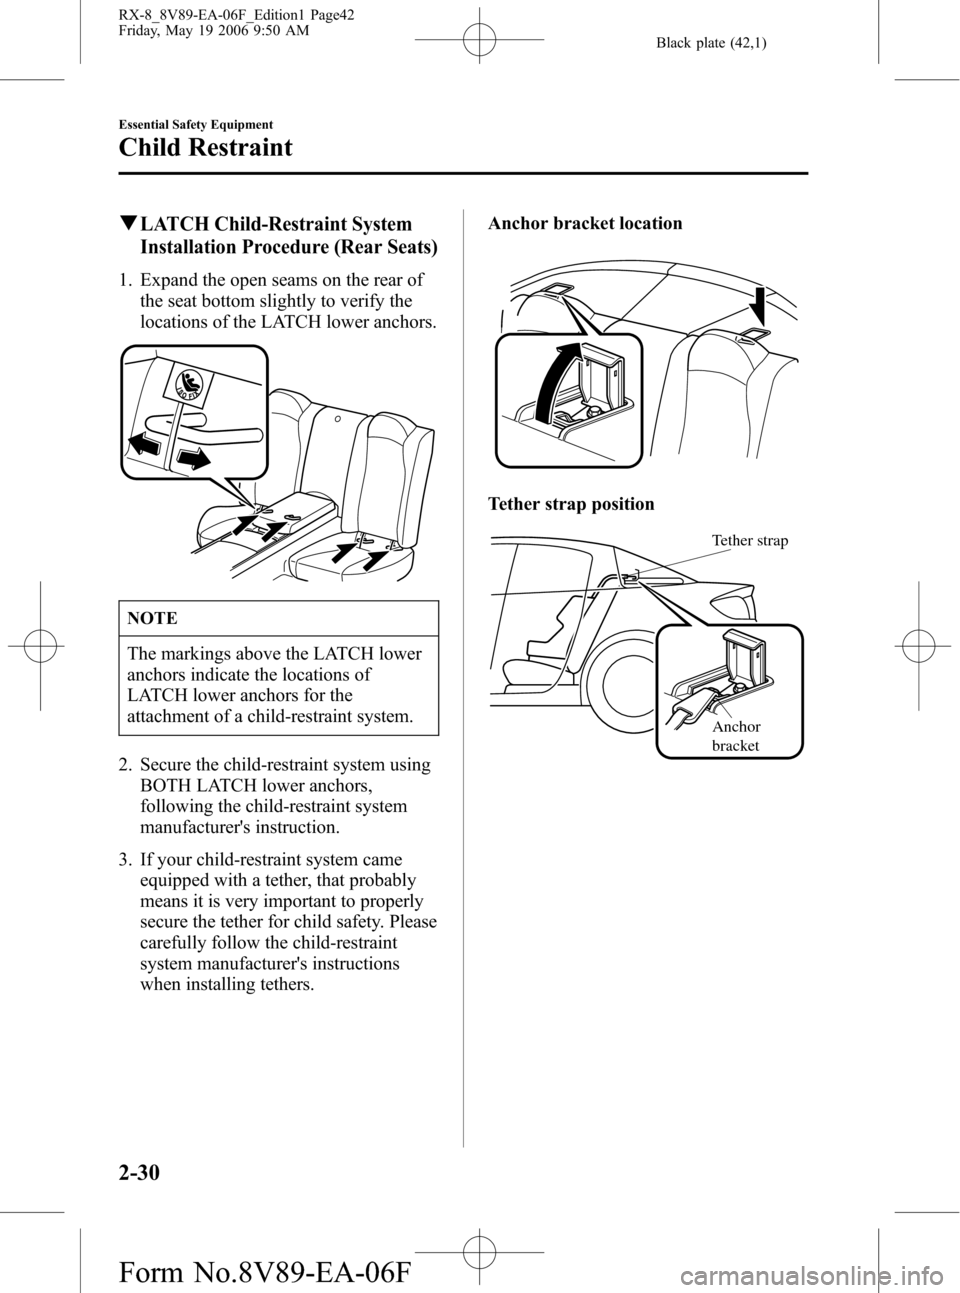 MAZDA MODEL RX 8 2007   (in English) Service Manual Black plate (42,1)
qLATCH Child-Restraint System
Installation Procedure (Rear Seats)
1. Expand the open seams on the rear of
the seat bottom slightly to verify the
locations of the LATCH lower anchors